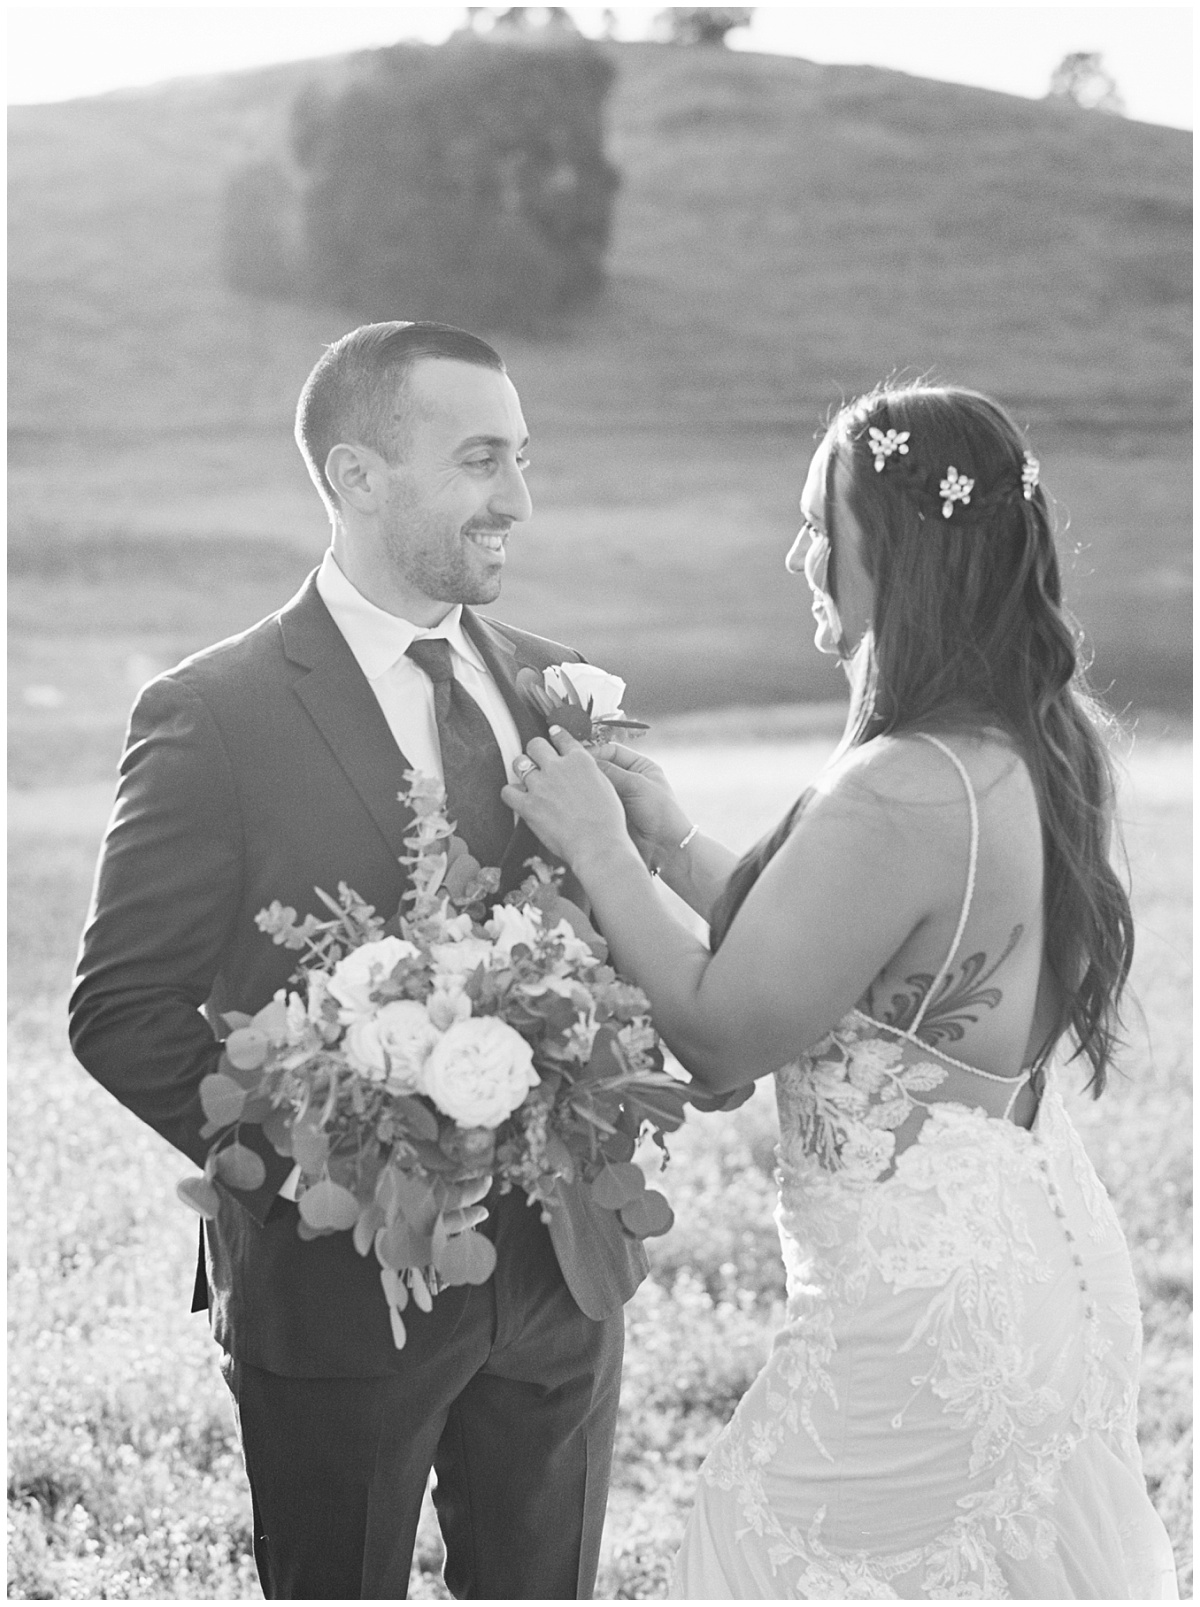 Intimate Elopement Black and White